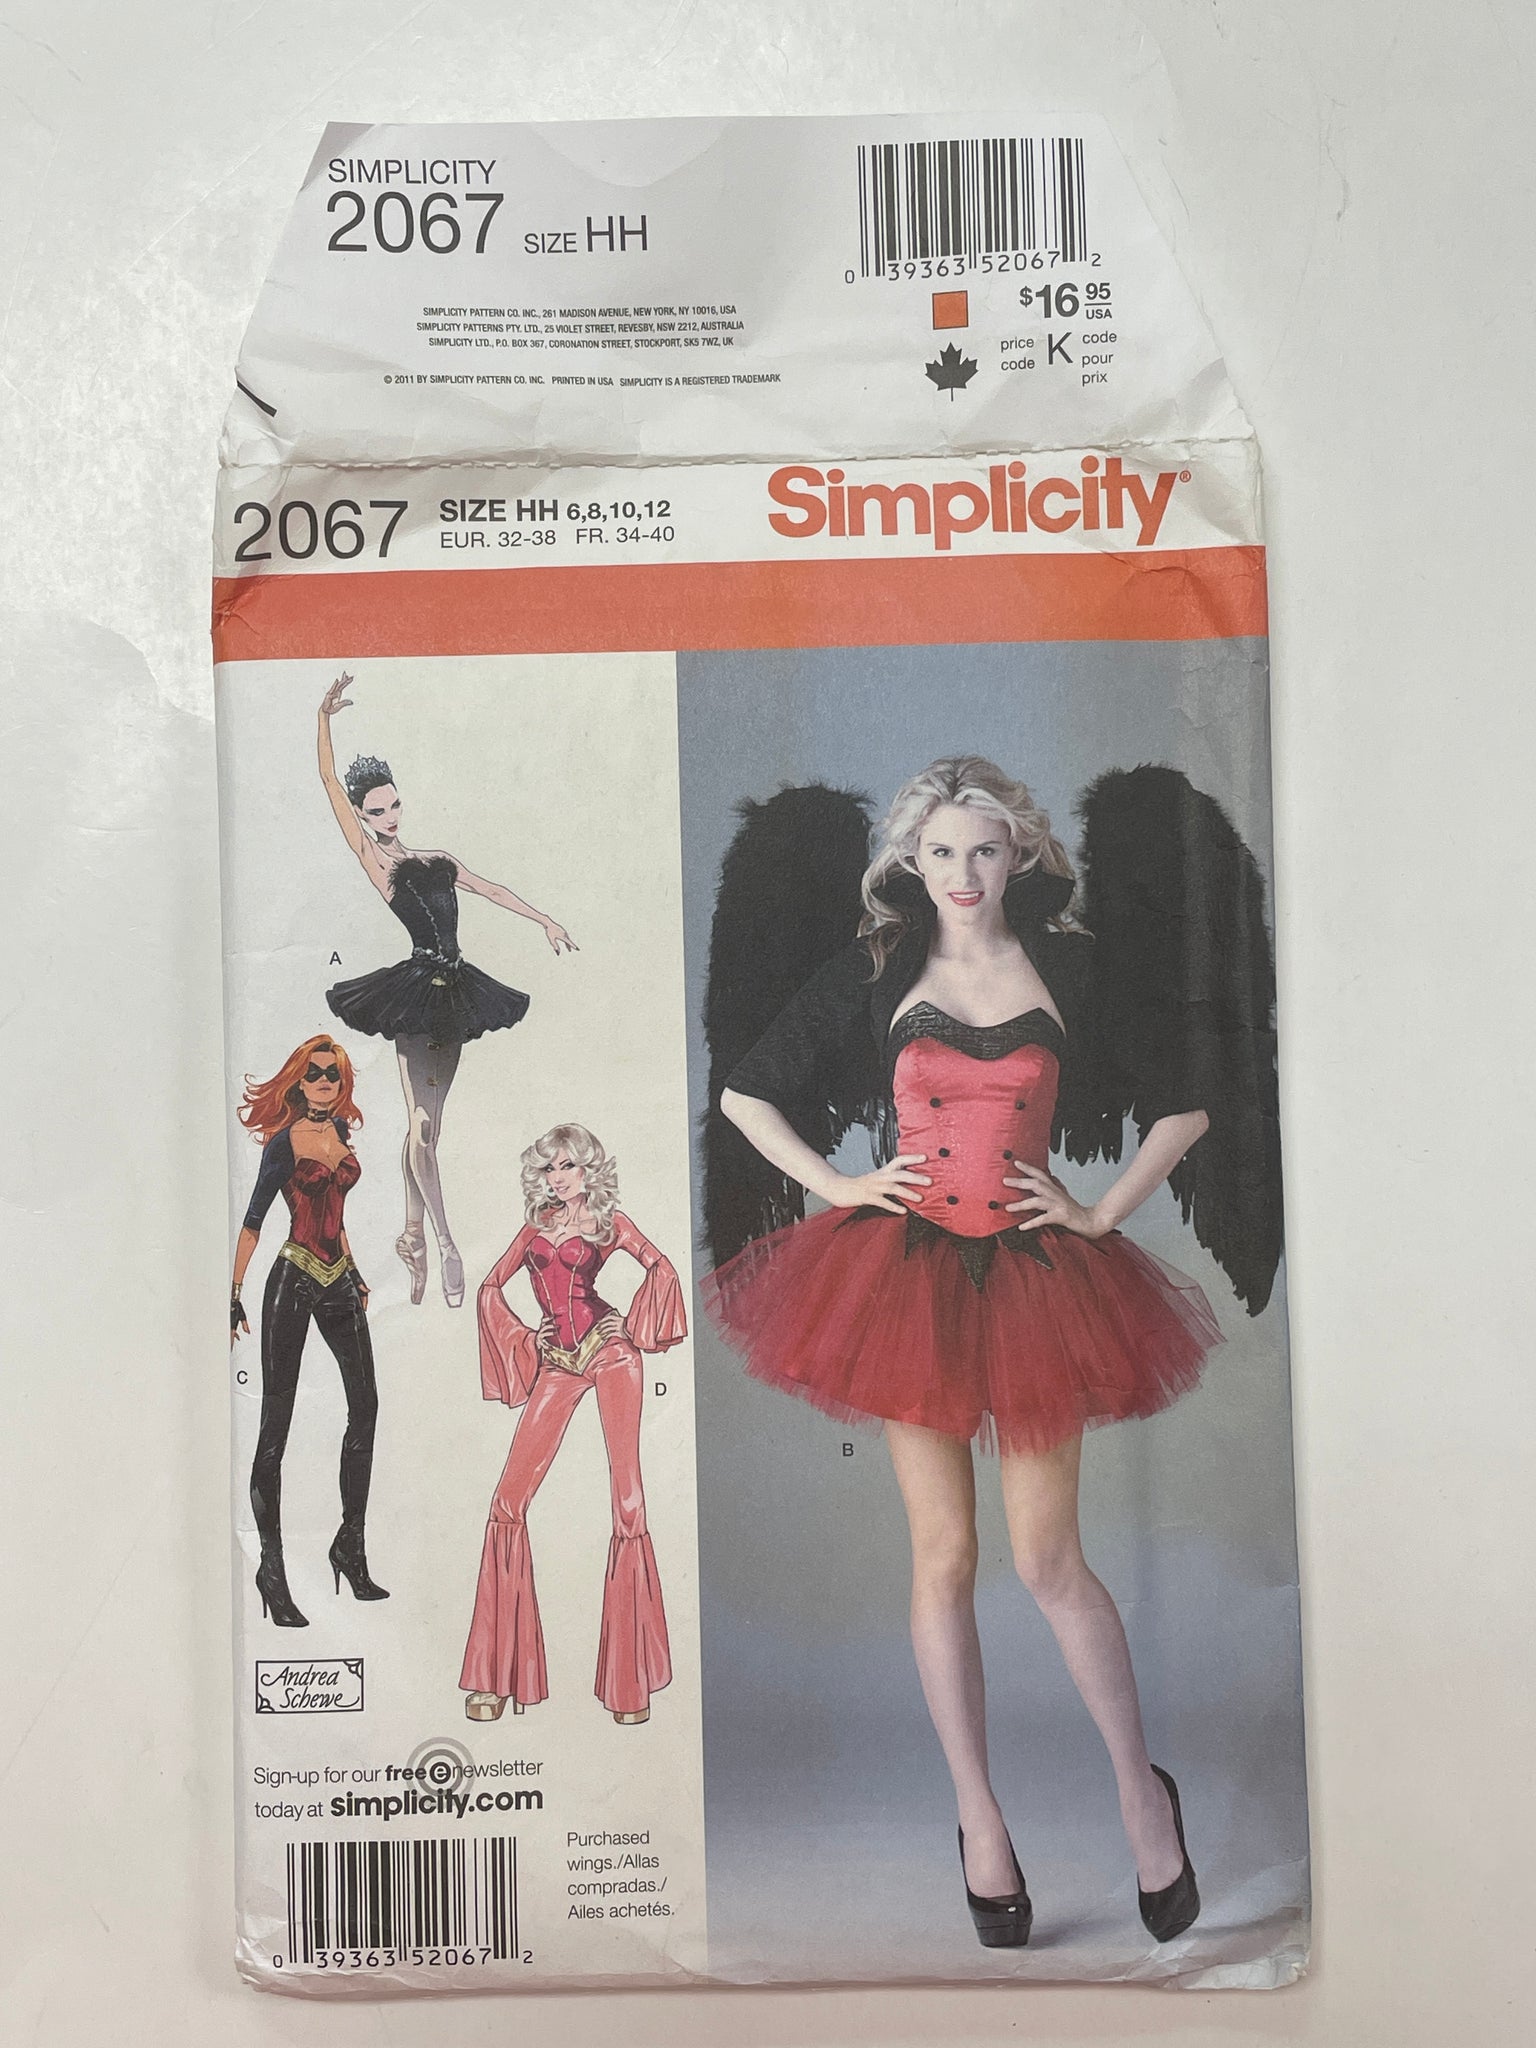 2011 Simplicity 2067 Sewing Pattern - Costume Bodice, Skirt and Pants FACTORY FOLDED